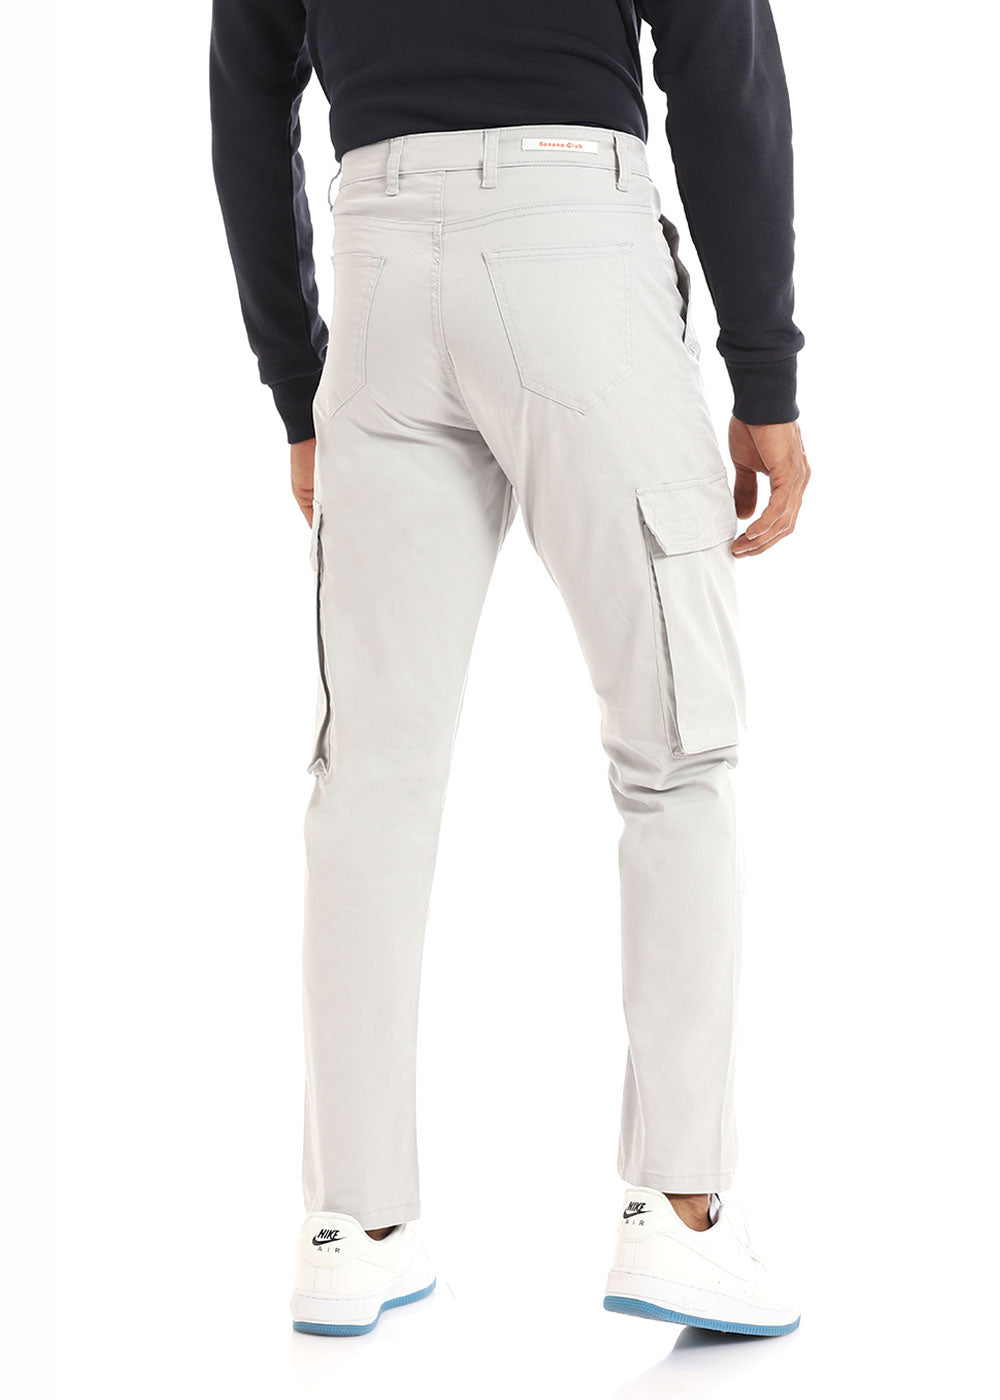 Back Buy Cool Gray Cargo Pant 